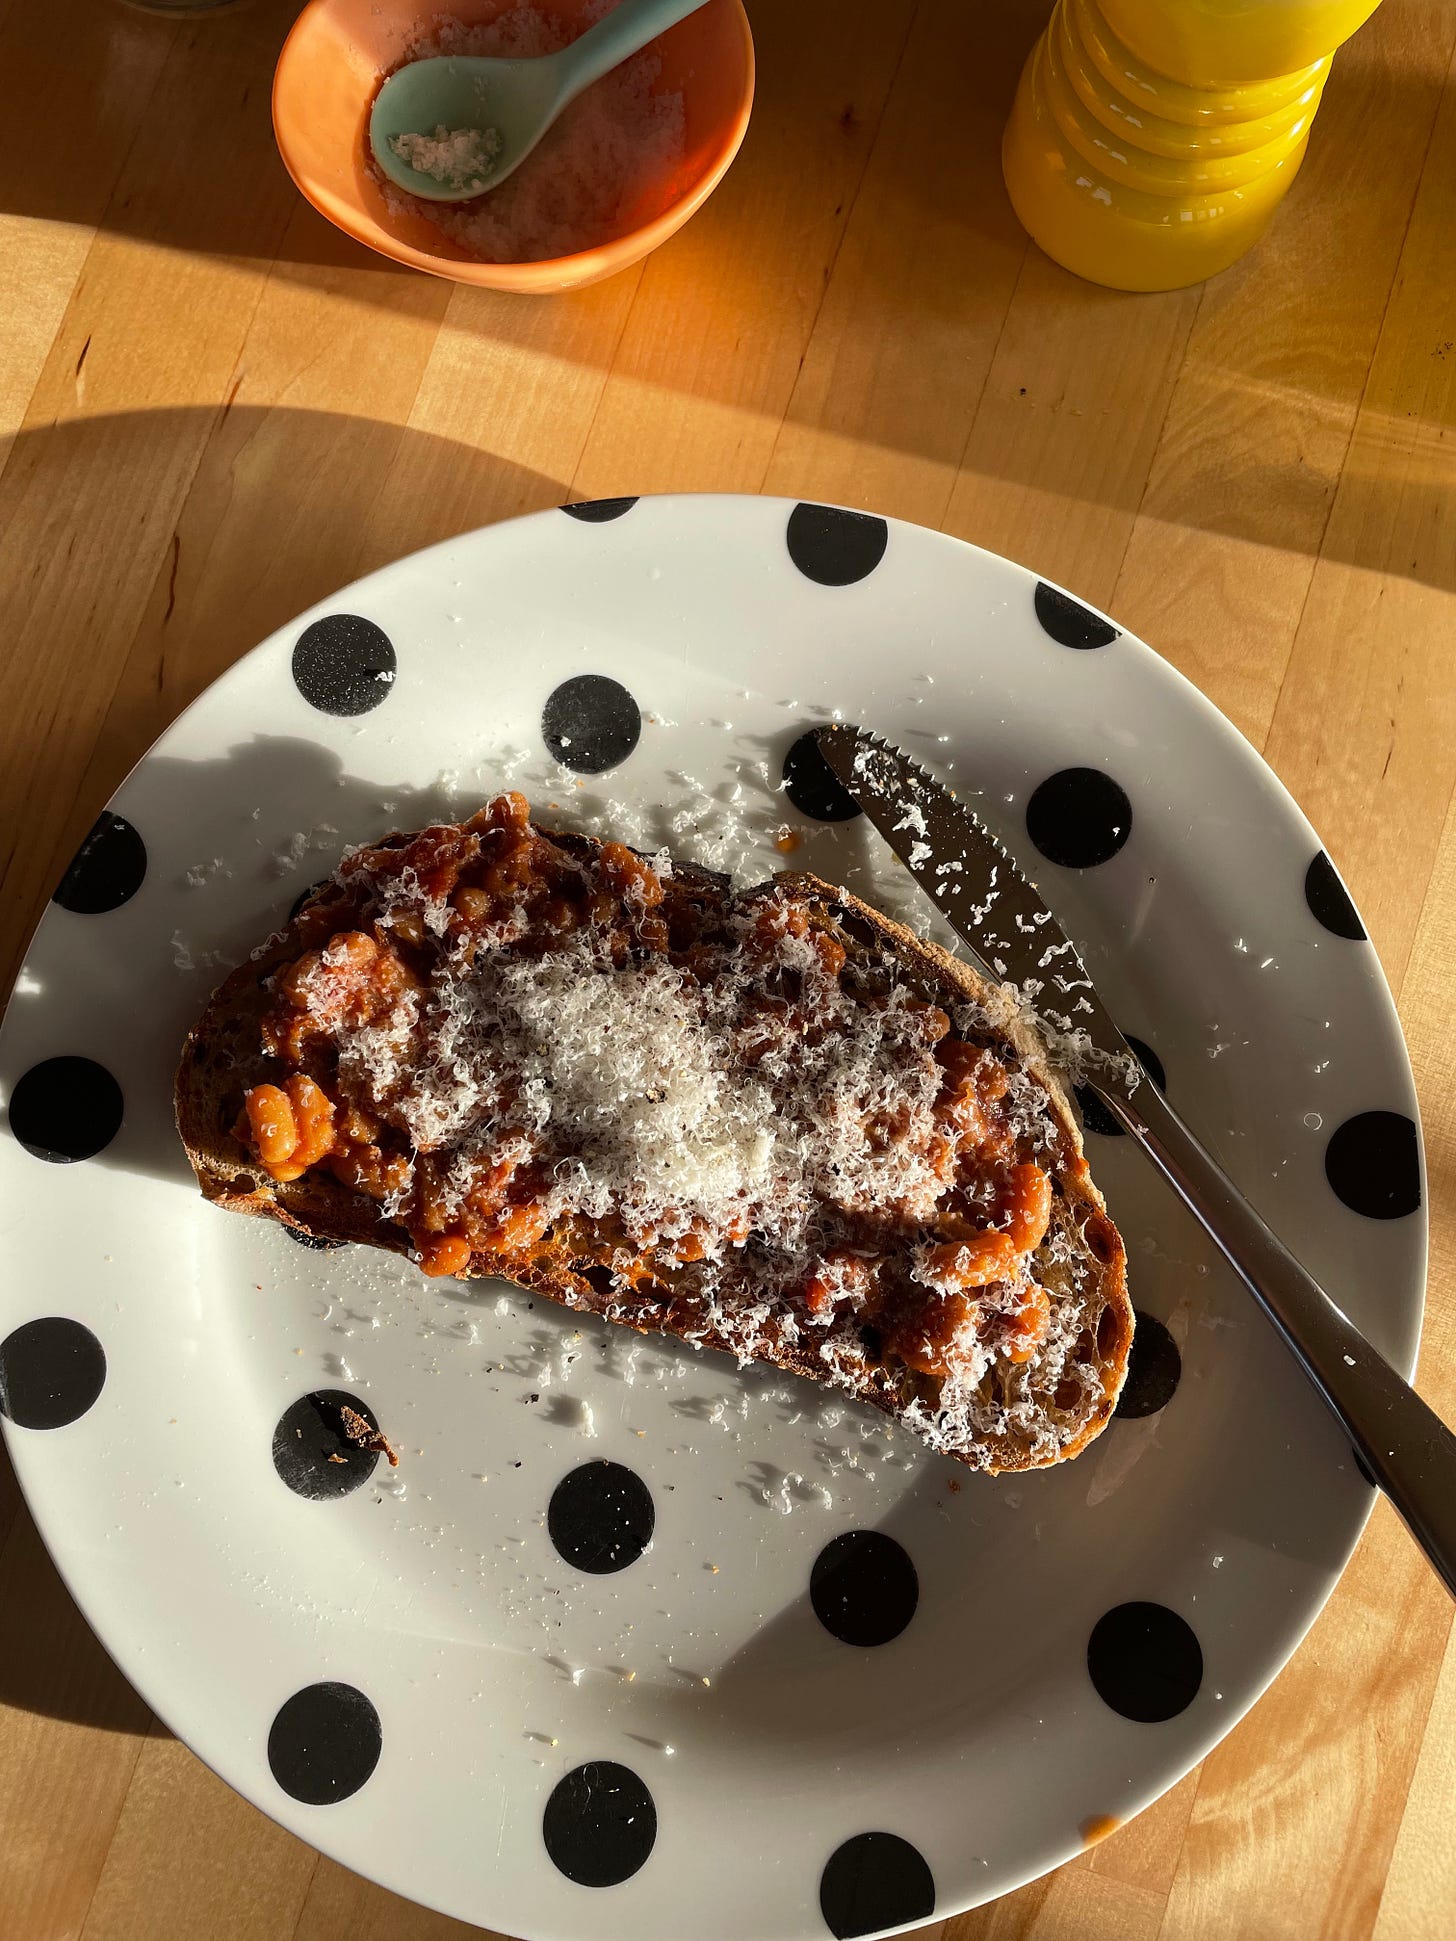 A piece of toast in the morning sun topped with baked beans and finely grated Parmesan cheese. Sea salt and a pepper grinder nearby. A warming any time meal.